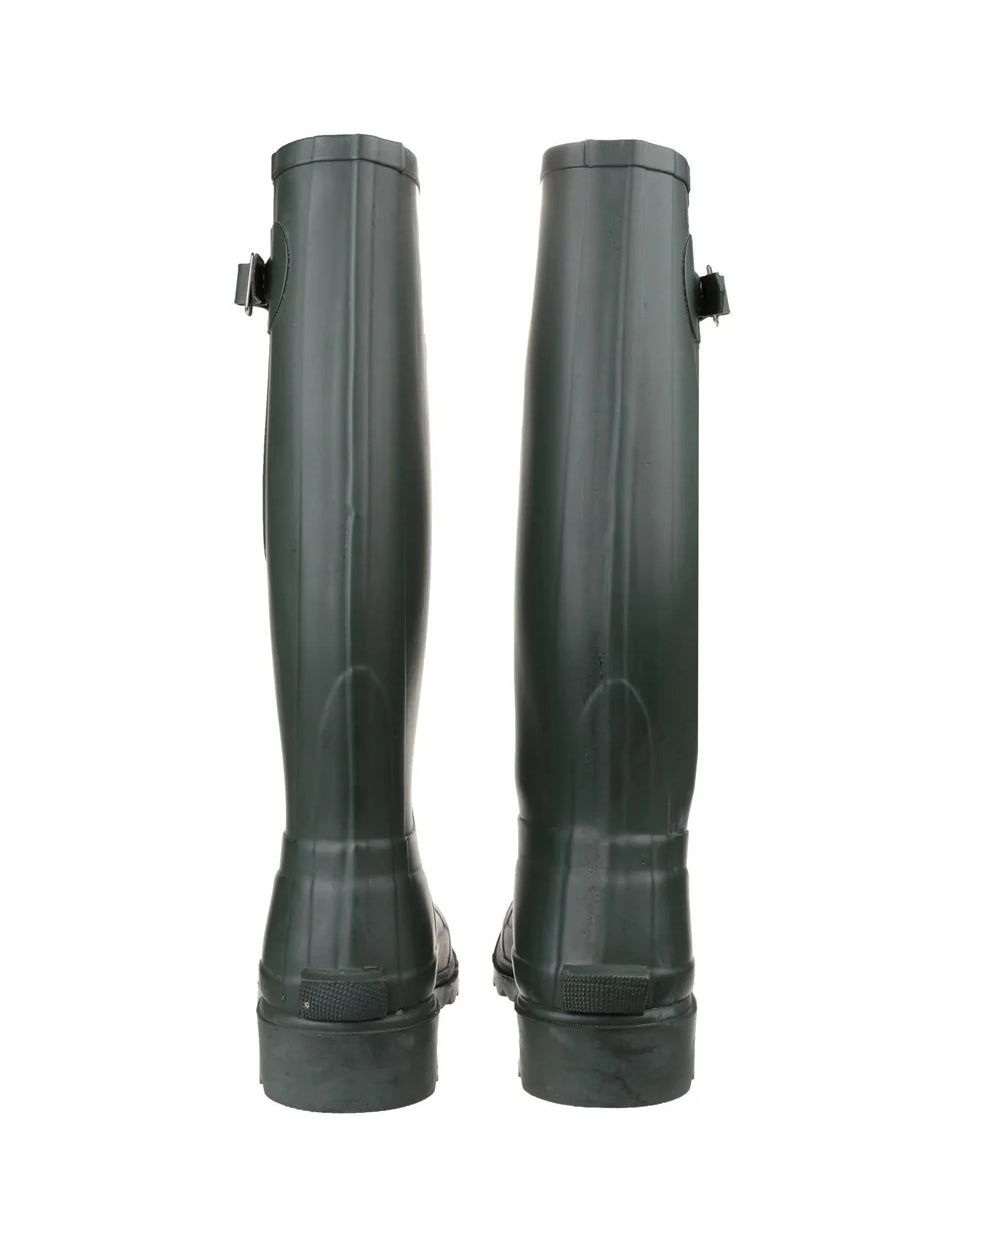 Green coloured Cotswold Ragley Waterproof Wellington Boots on white background 